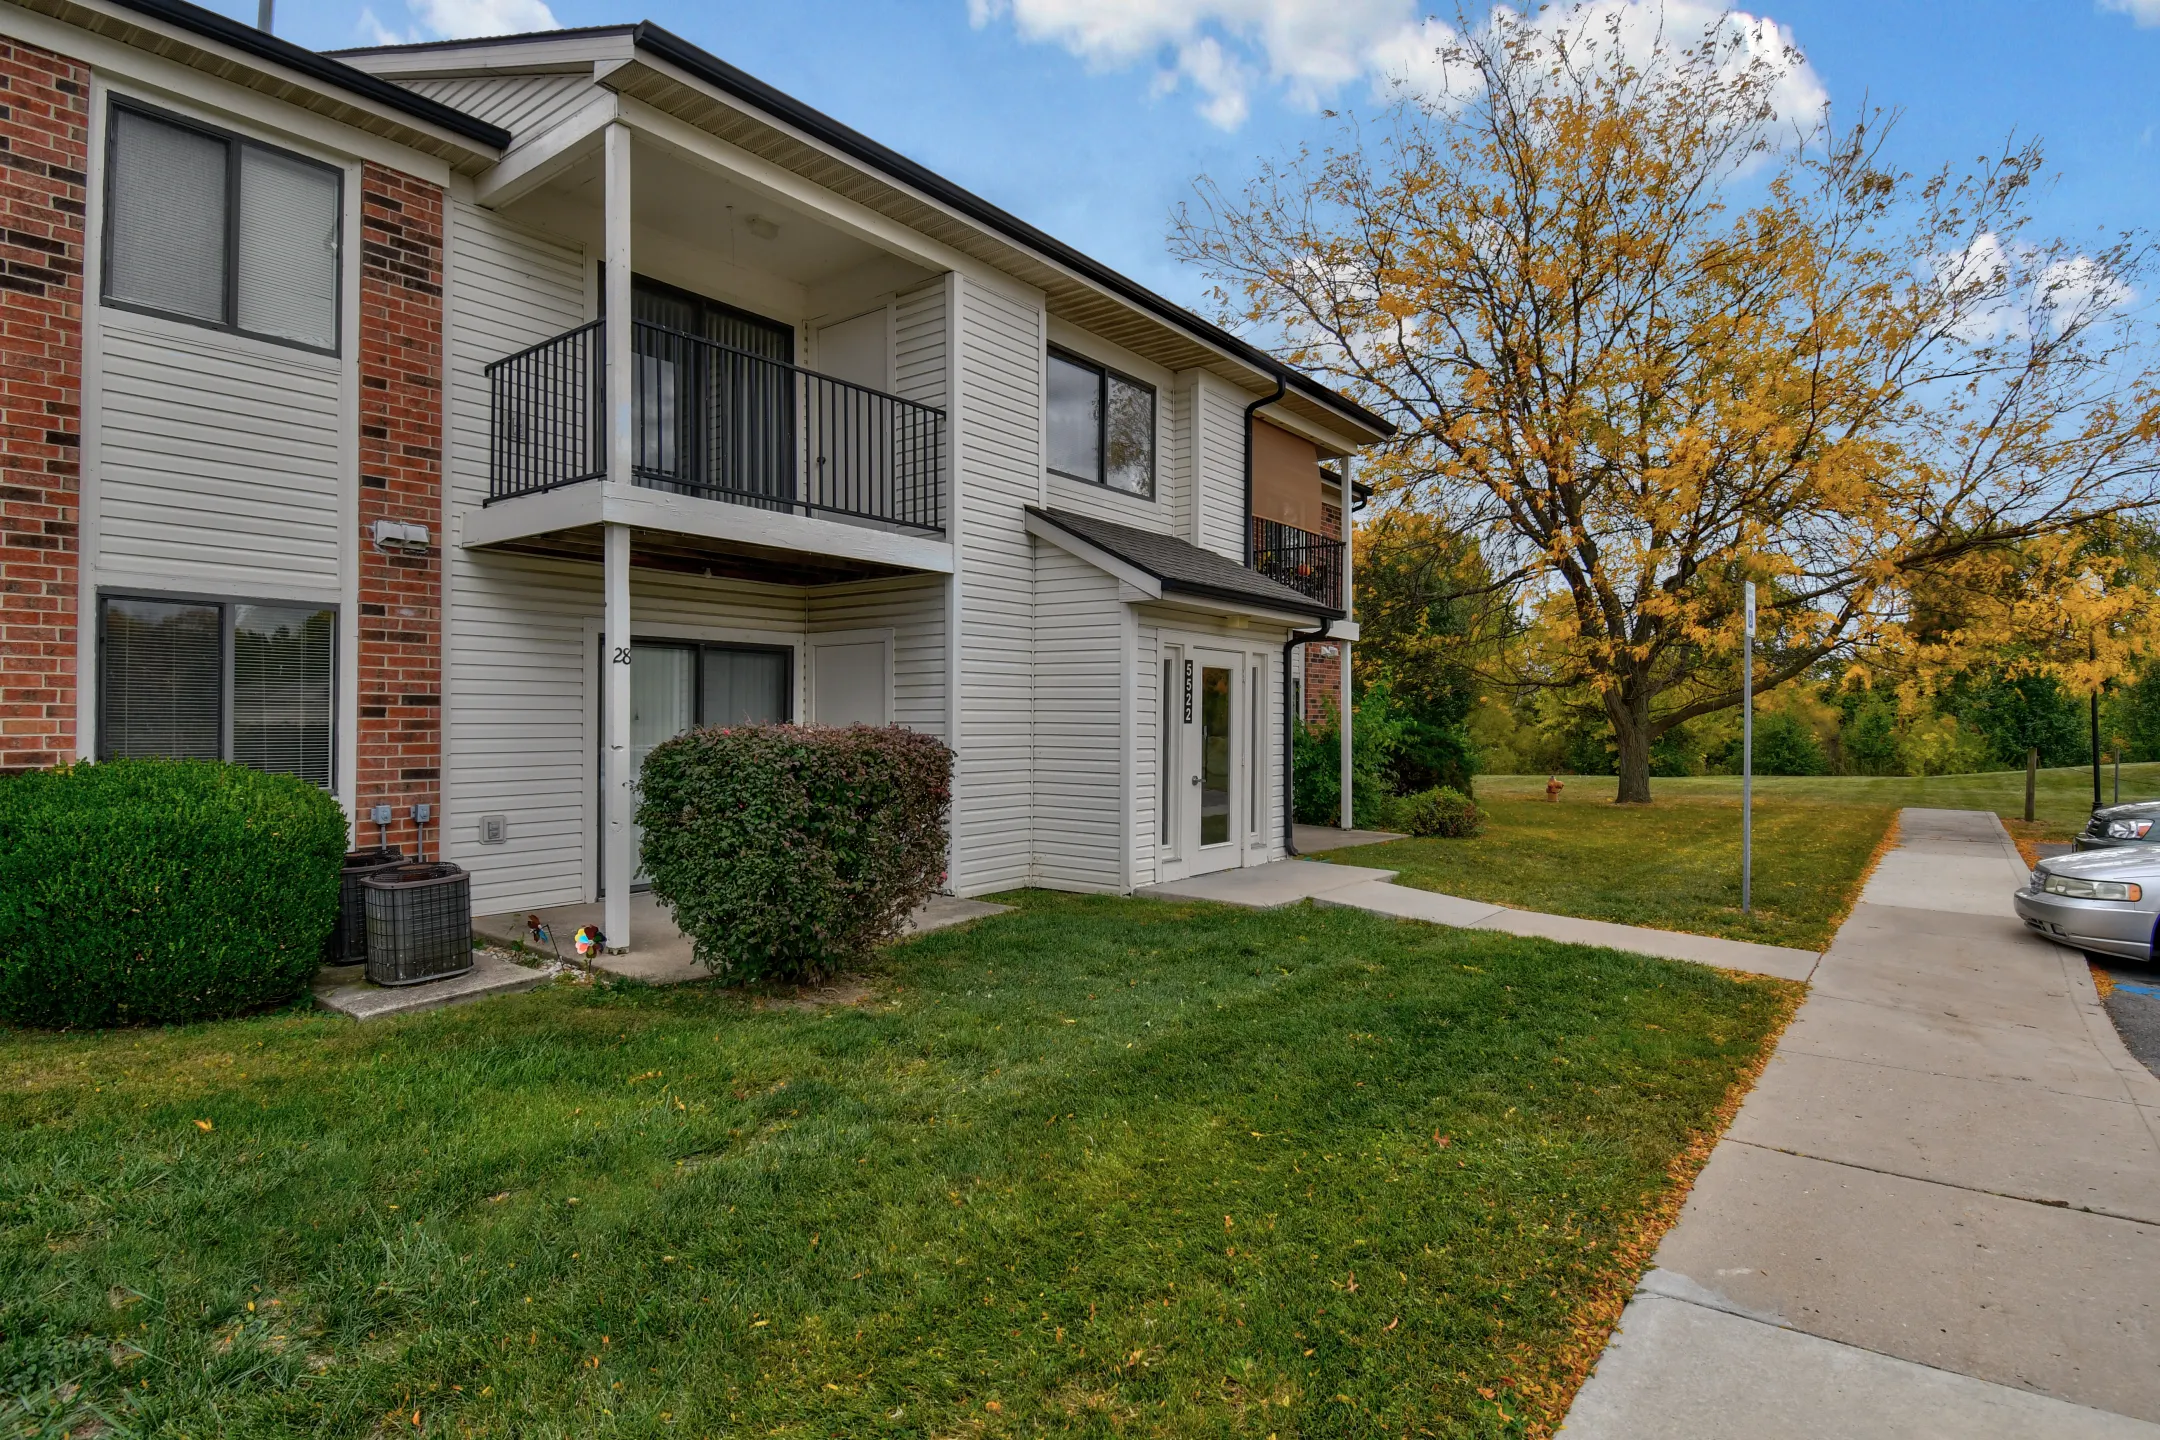 Building - Hickory Knoll Apartments - Anderson, IN